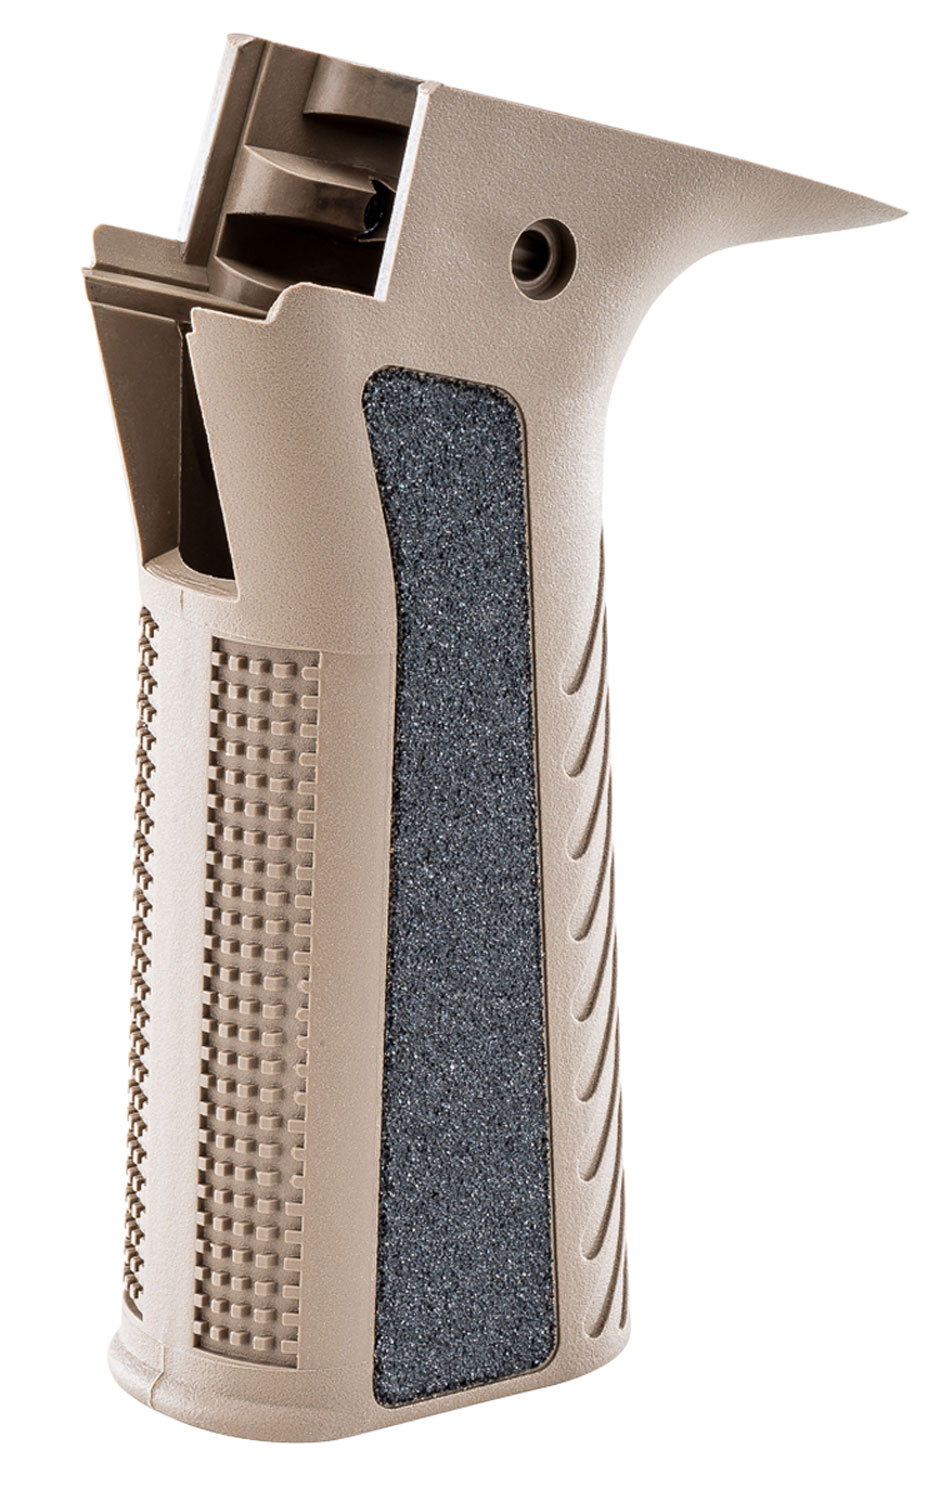 Apex Tactical 116111 Optimized Grip  Made of Polymer With Flat Dark Earth Aggressive Textured Finish for CZ Scorpion EVO 3 S1